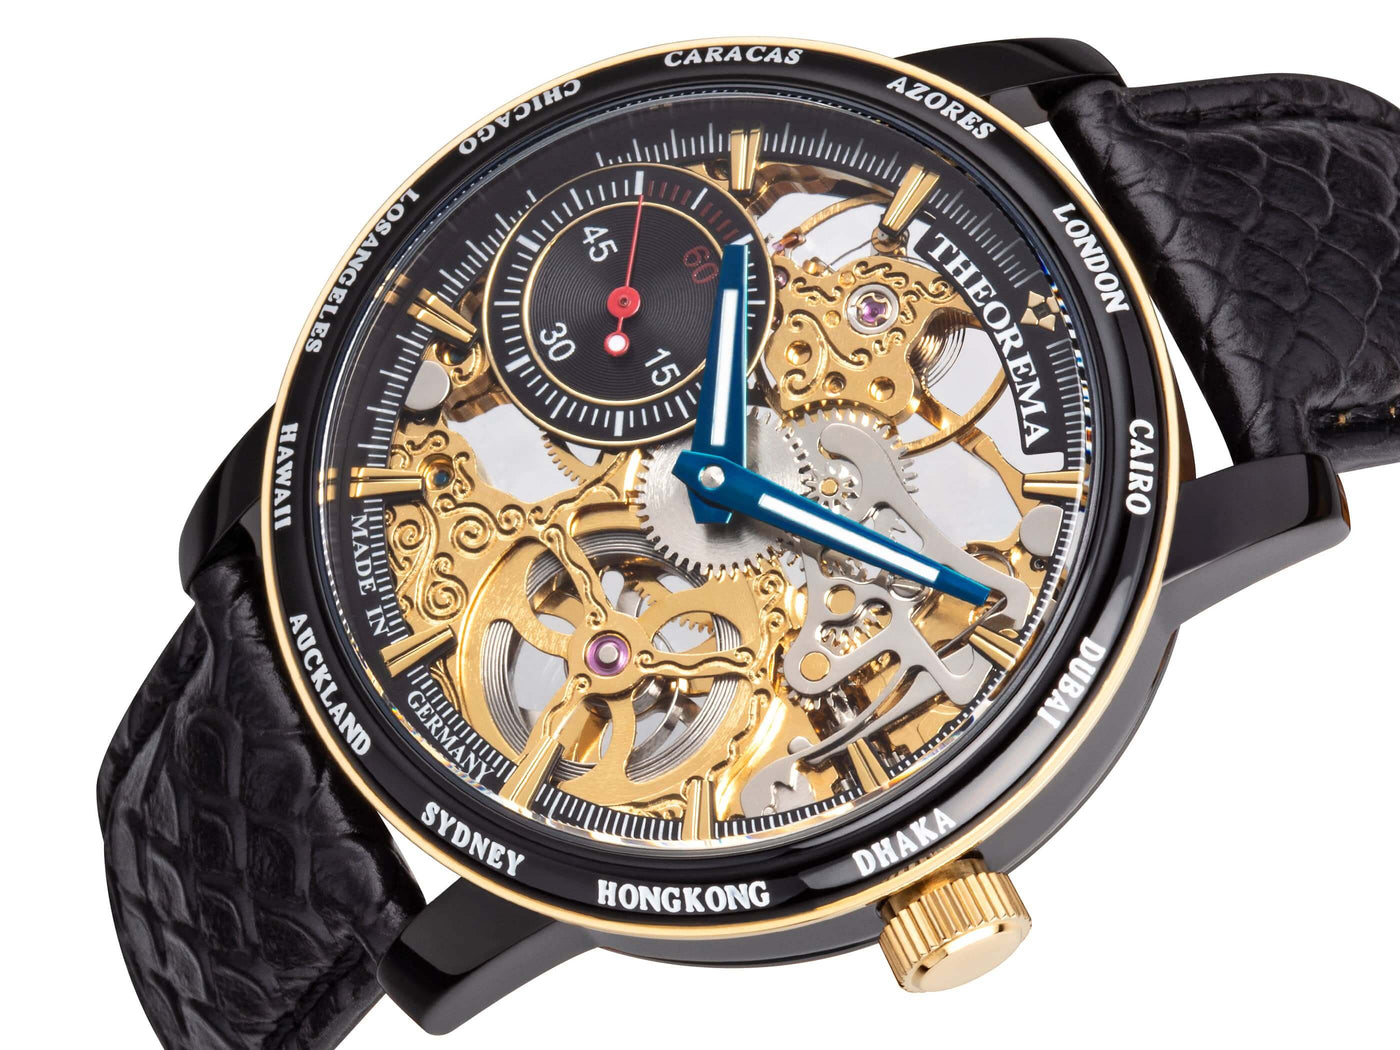 Gold skeletonized dial with a black sub-dial on the left side.